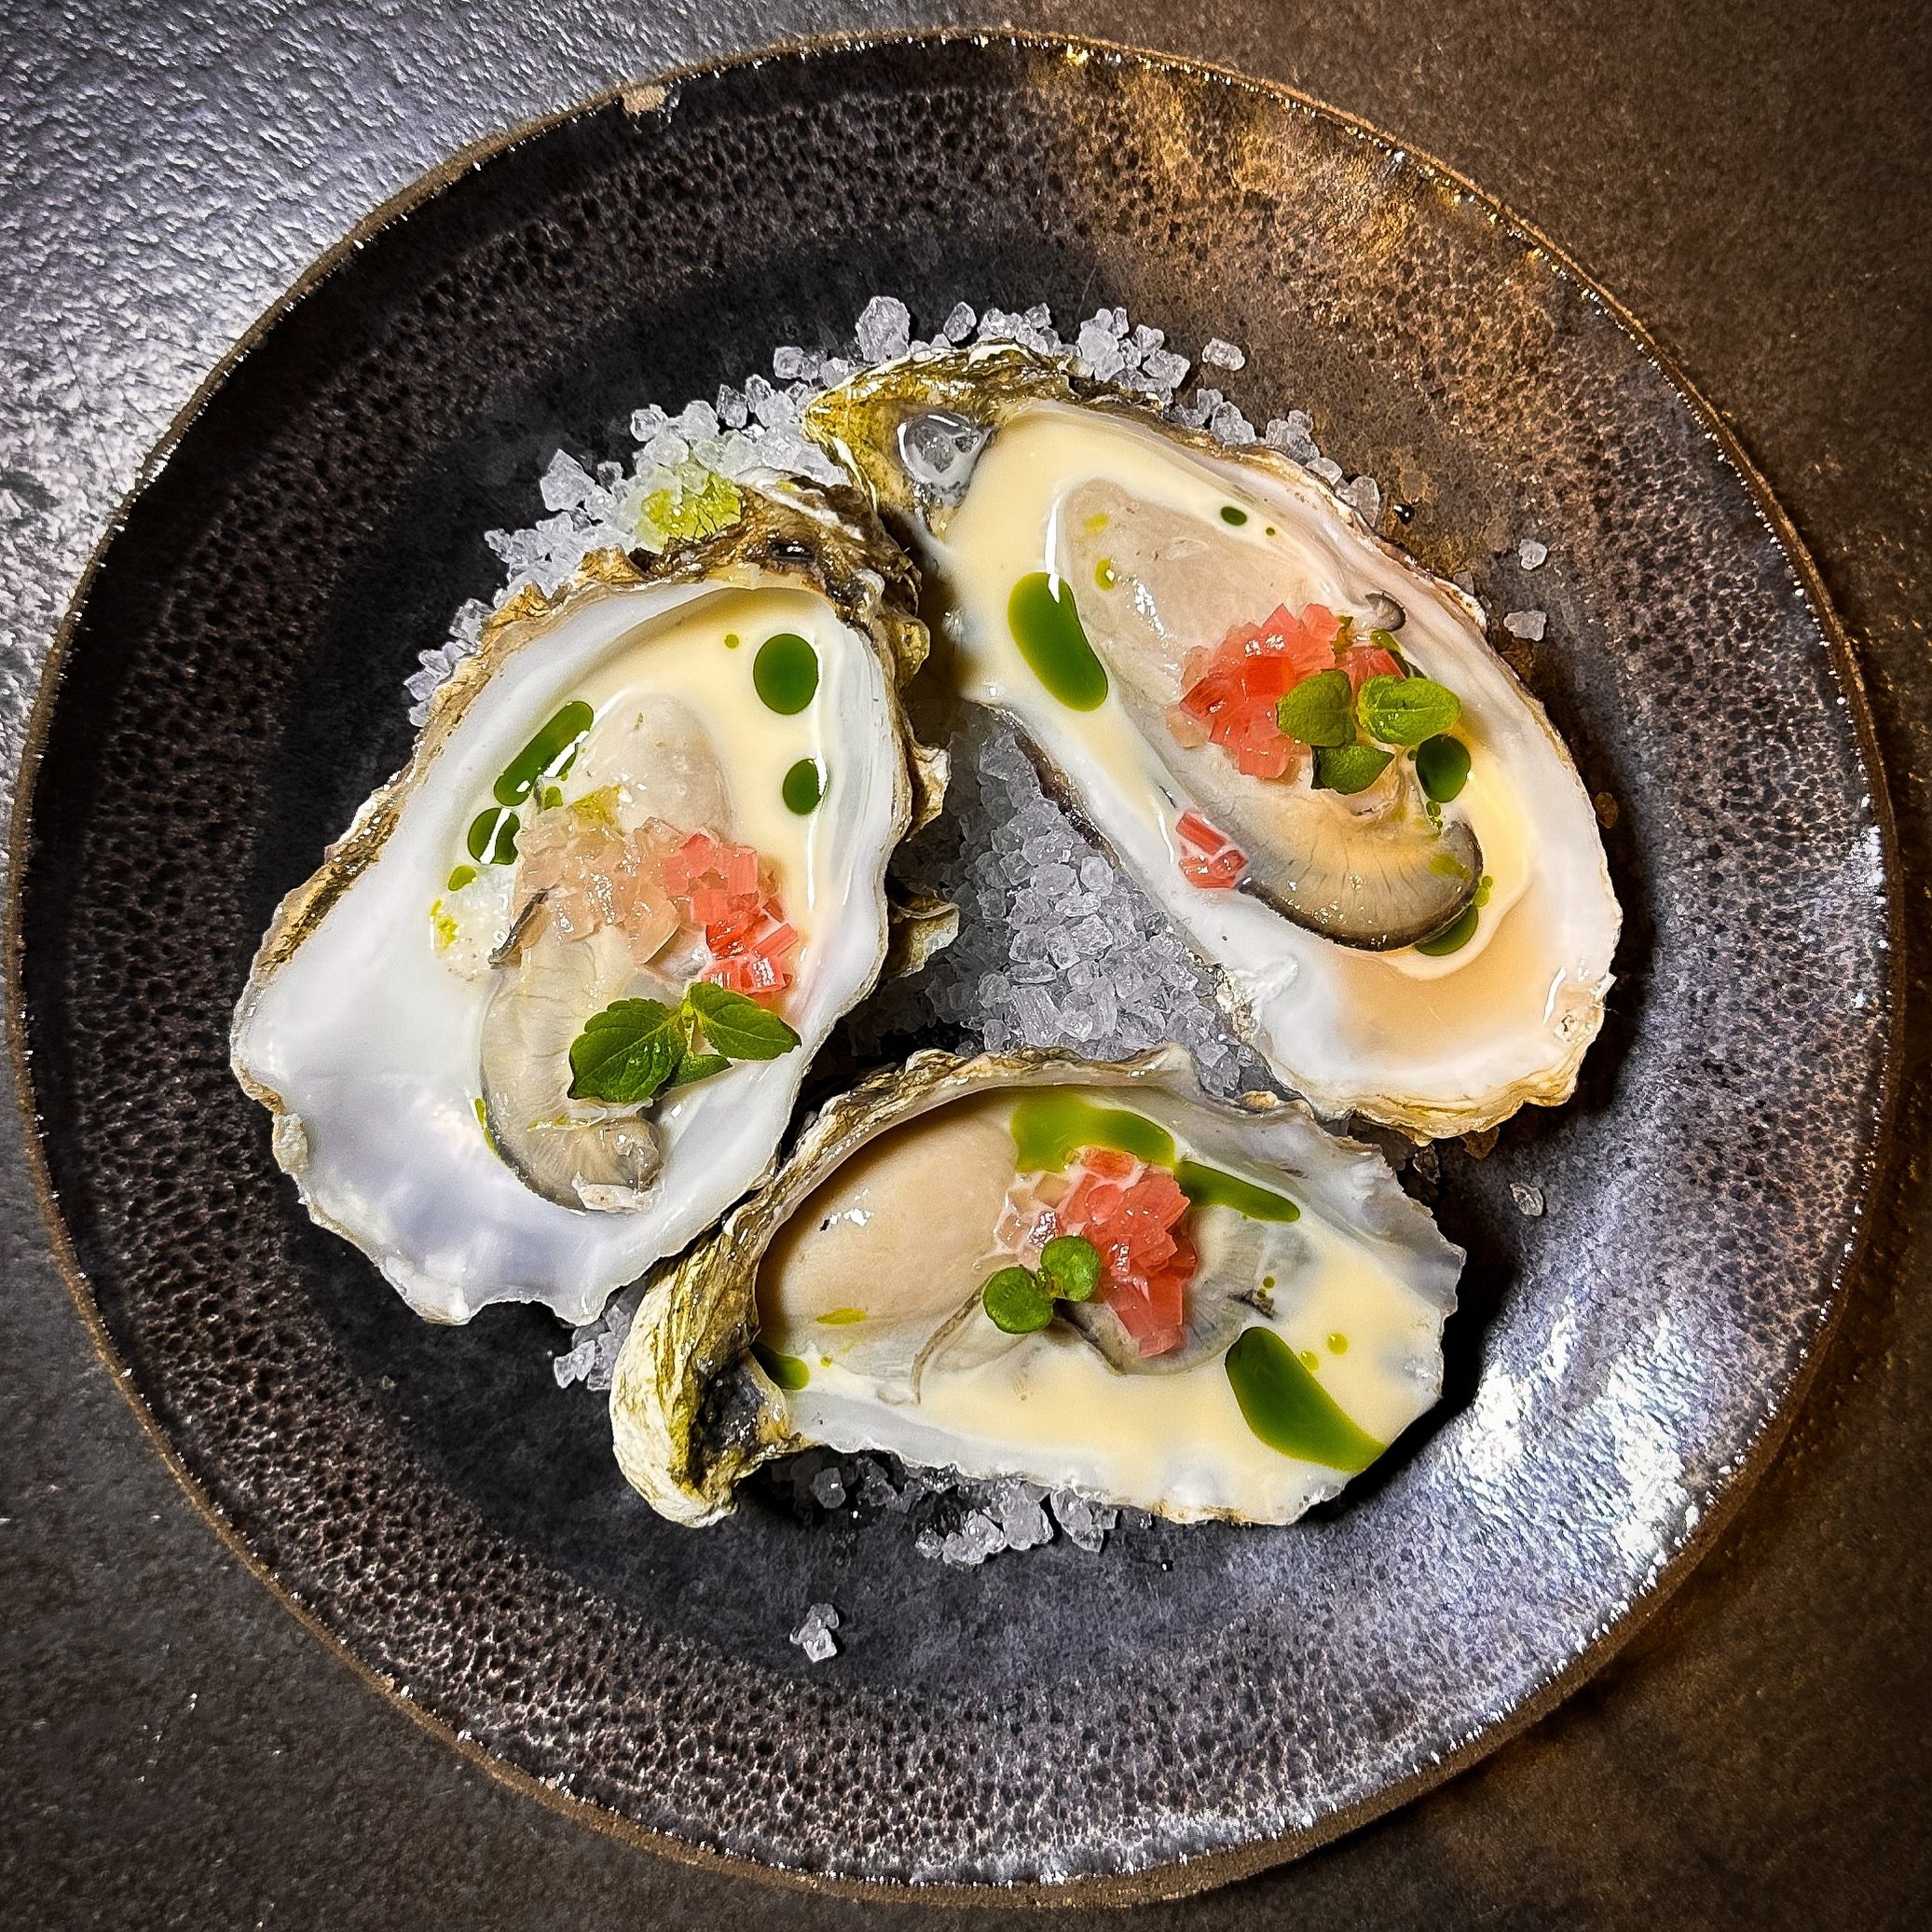 Poached Colchester Oysters | Forced Rhubarb | Pickled Shallot 

The new oyster garnish with a beautiful rhubarb emulsion made with our preserved rhubarb vinegar. A perfect balance to salty oysters this sweet and sour rhubarb - delicious!

#liverpoolf